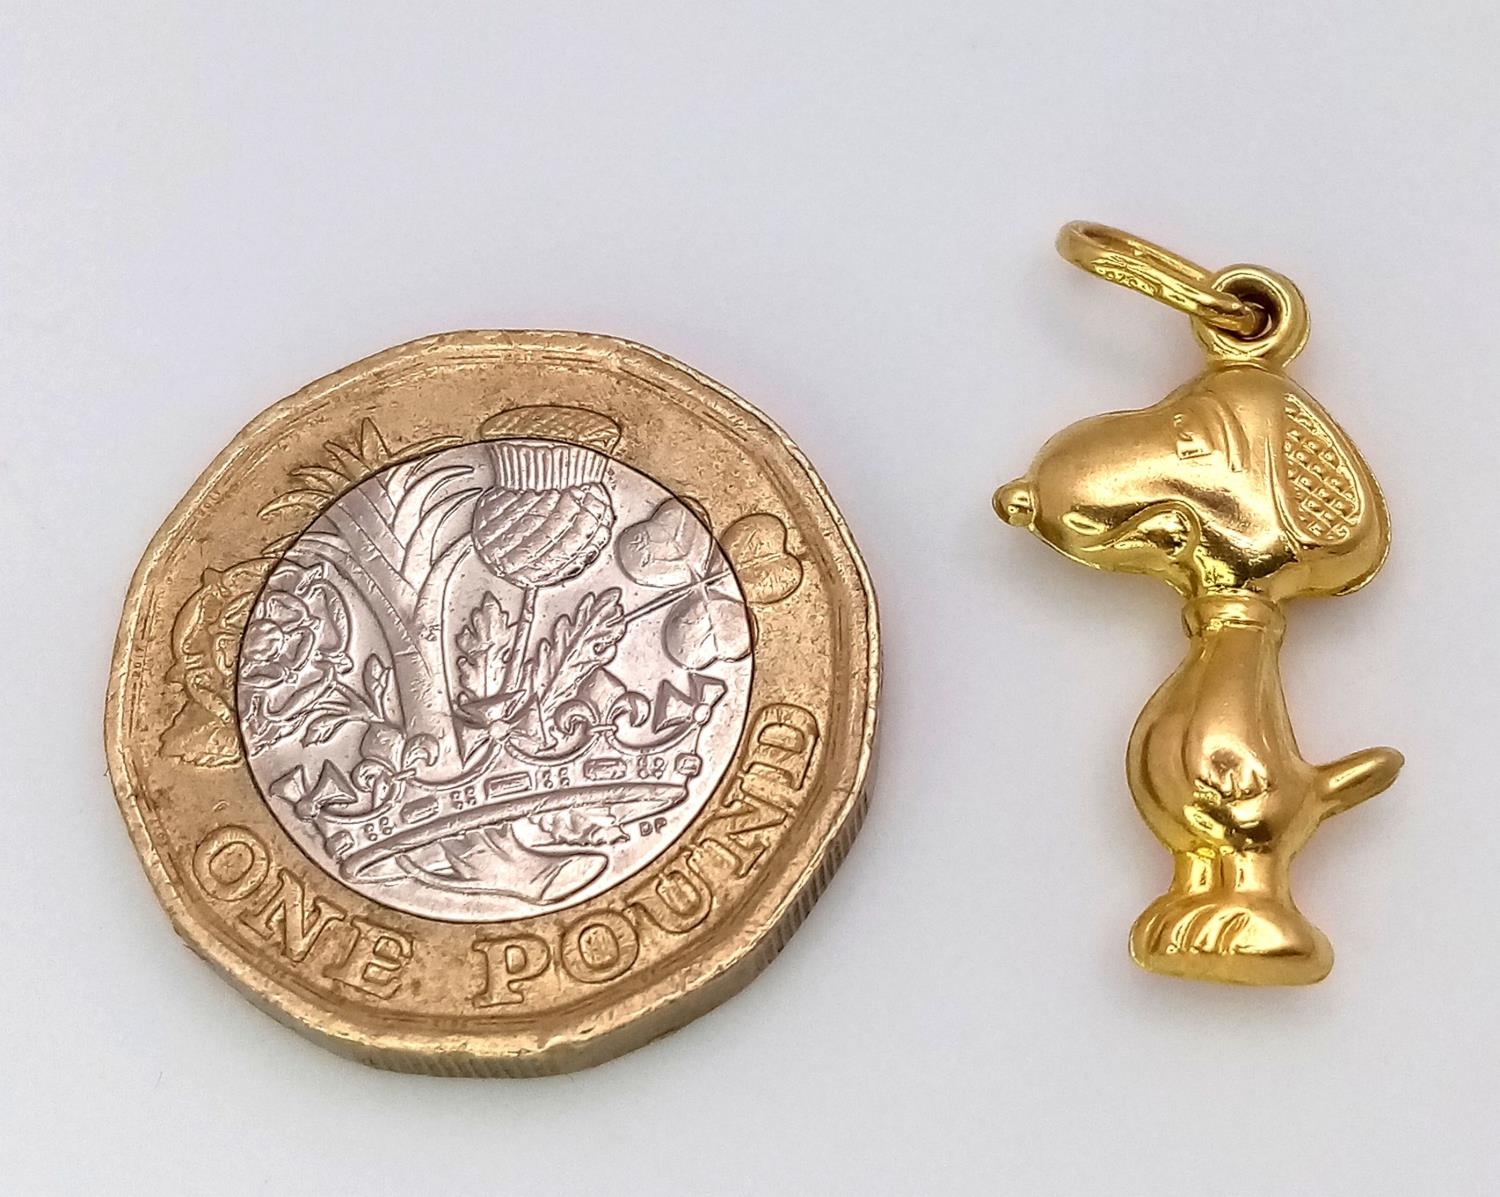 A 9K YELLOW GOLD SNOOPY THE DOG CHARM 1G , 37mm x 10mm. SC 9006 - Image 4 of 4